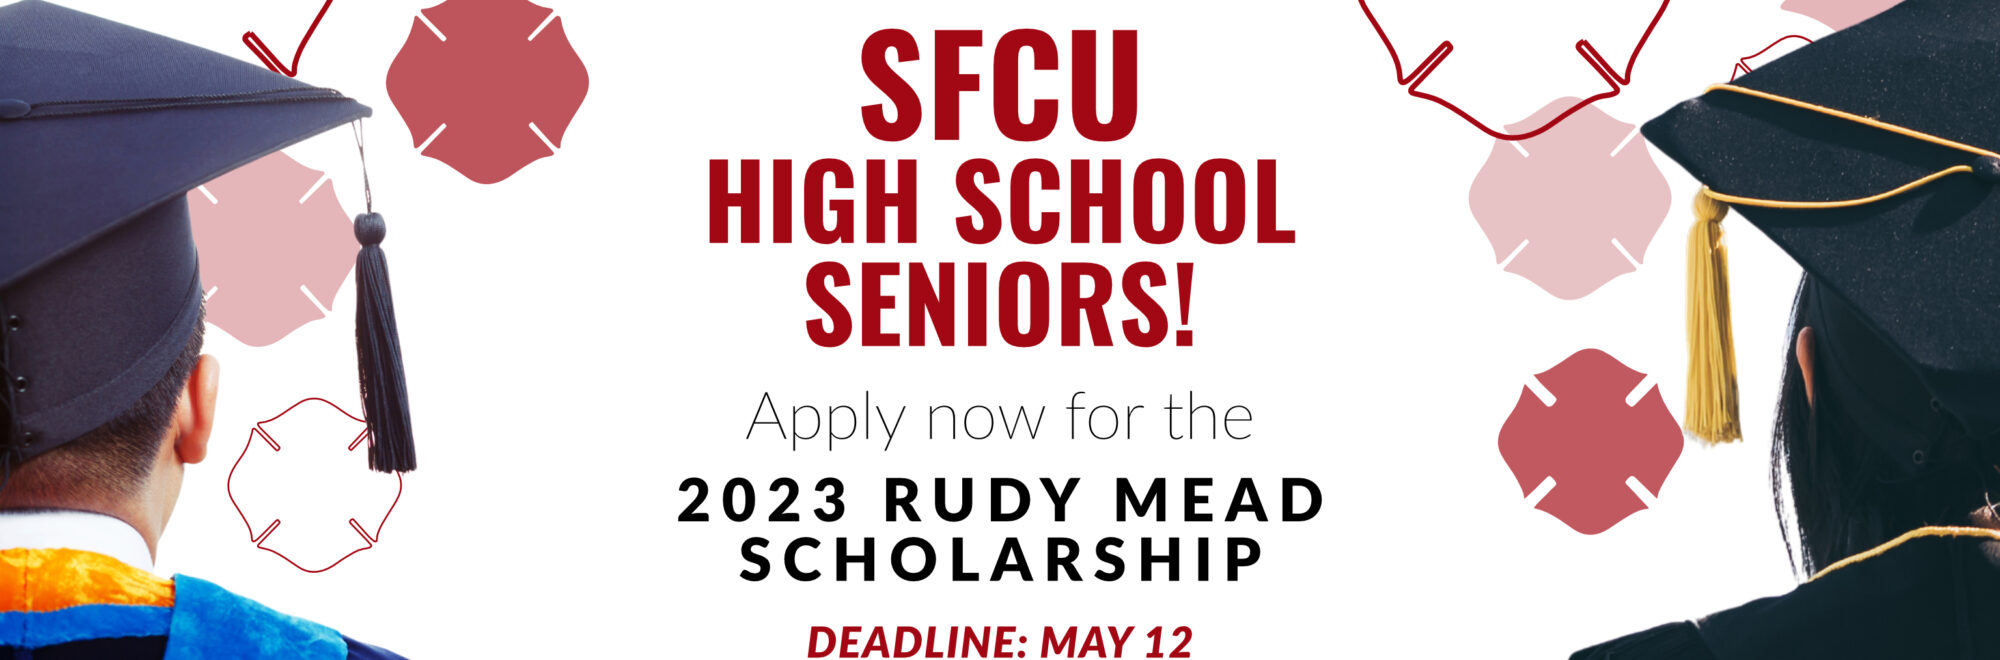 2023 Rudy Mead Scholarship Application